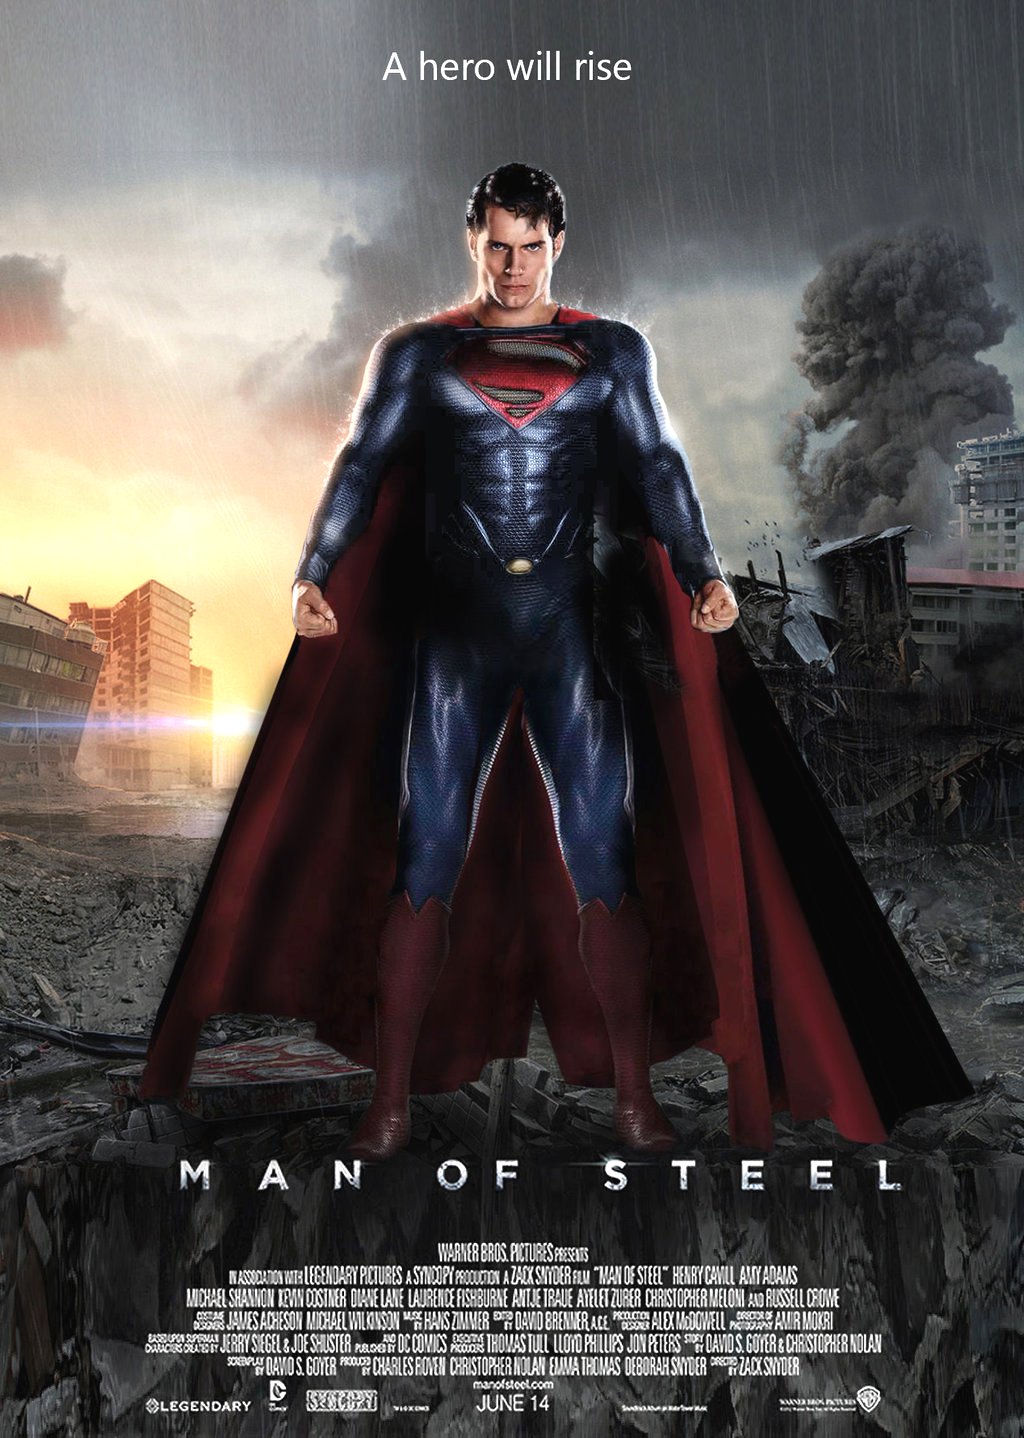 Man of Steel Movie Poster Google image from http://fc05.deviantart.net/fs71/i/2013/119/f/7/man_of_steel___a_hero_will_rise__movie_poster_by_djprincenorway-d62ztdy.jpg